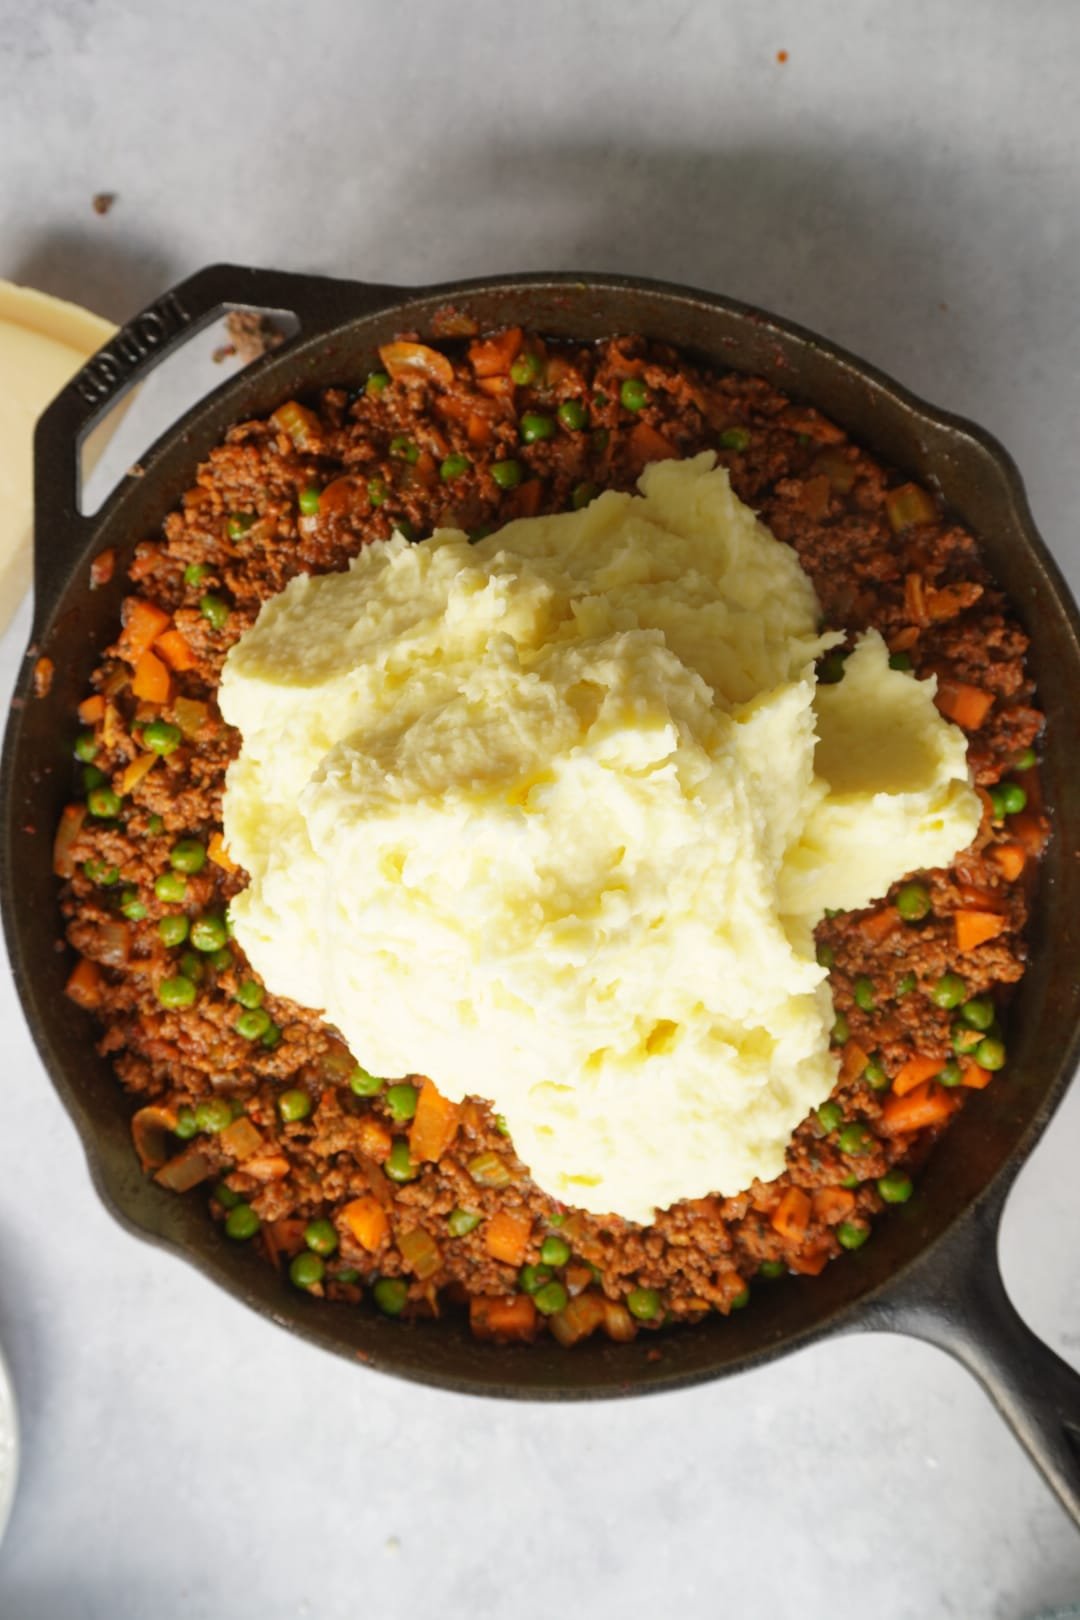 Layer the mash on top of the mixture for a Classic English Shepherds Pie